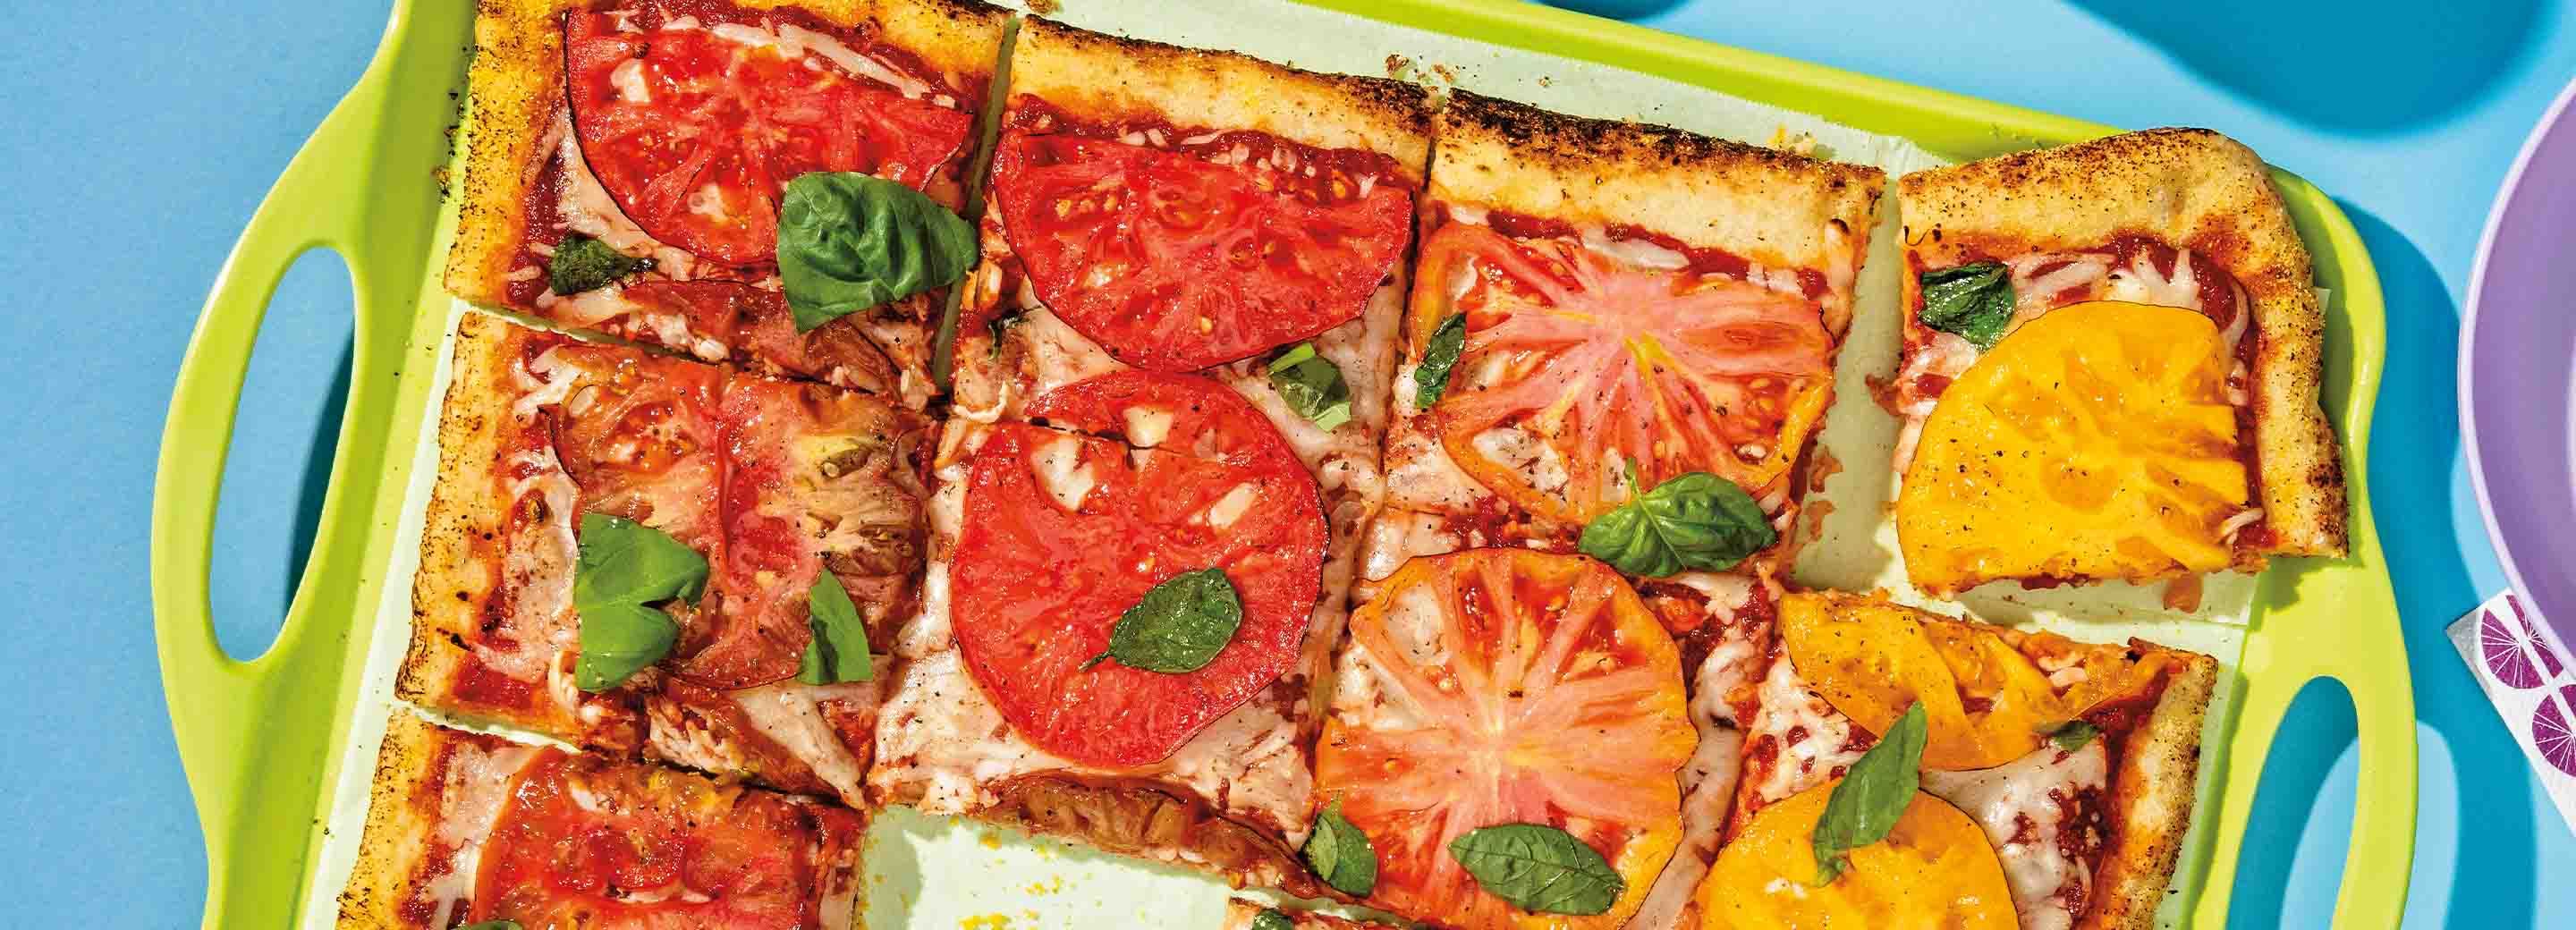 Tomato Grilled Pizza